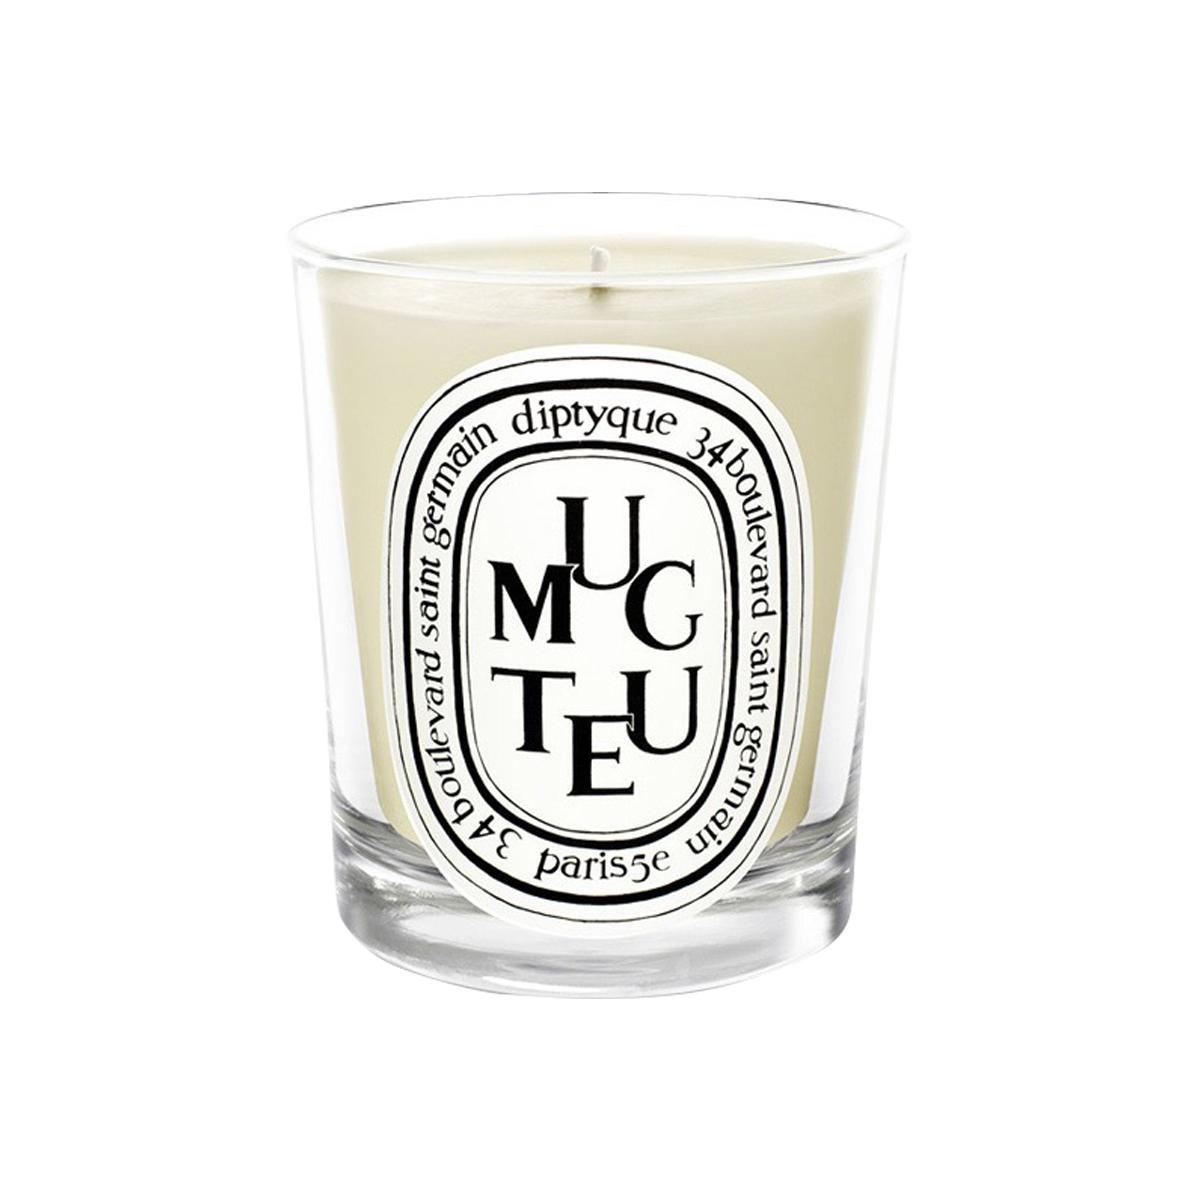 Primary image of Muguet (Lily of the Valley) Candle